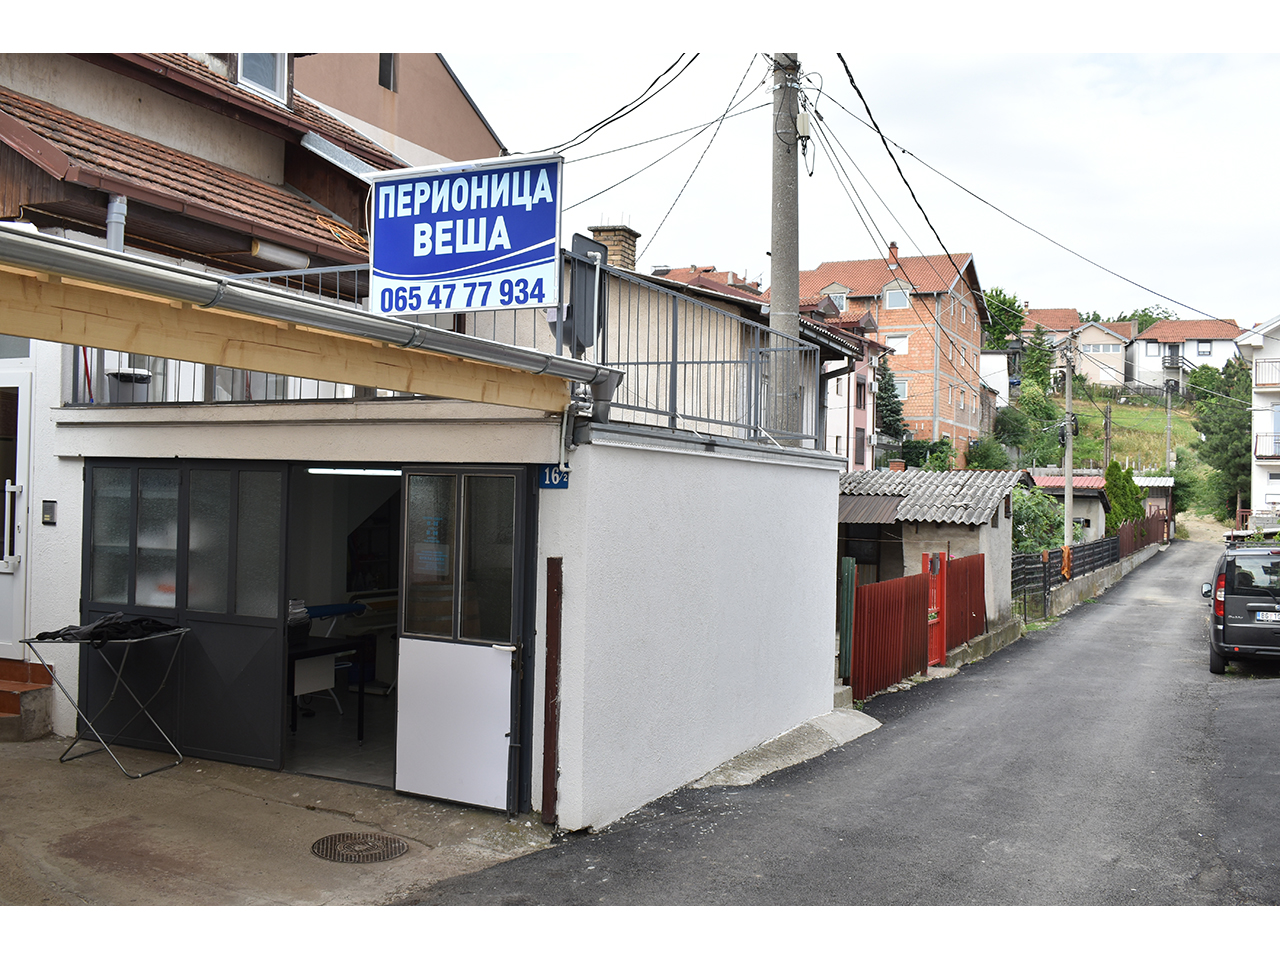 Photo 1 - DRY CLEANING AND LAUNDRY KRISTALINO Laundries Belgrade